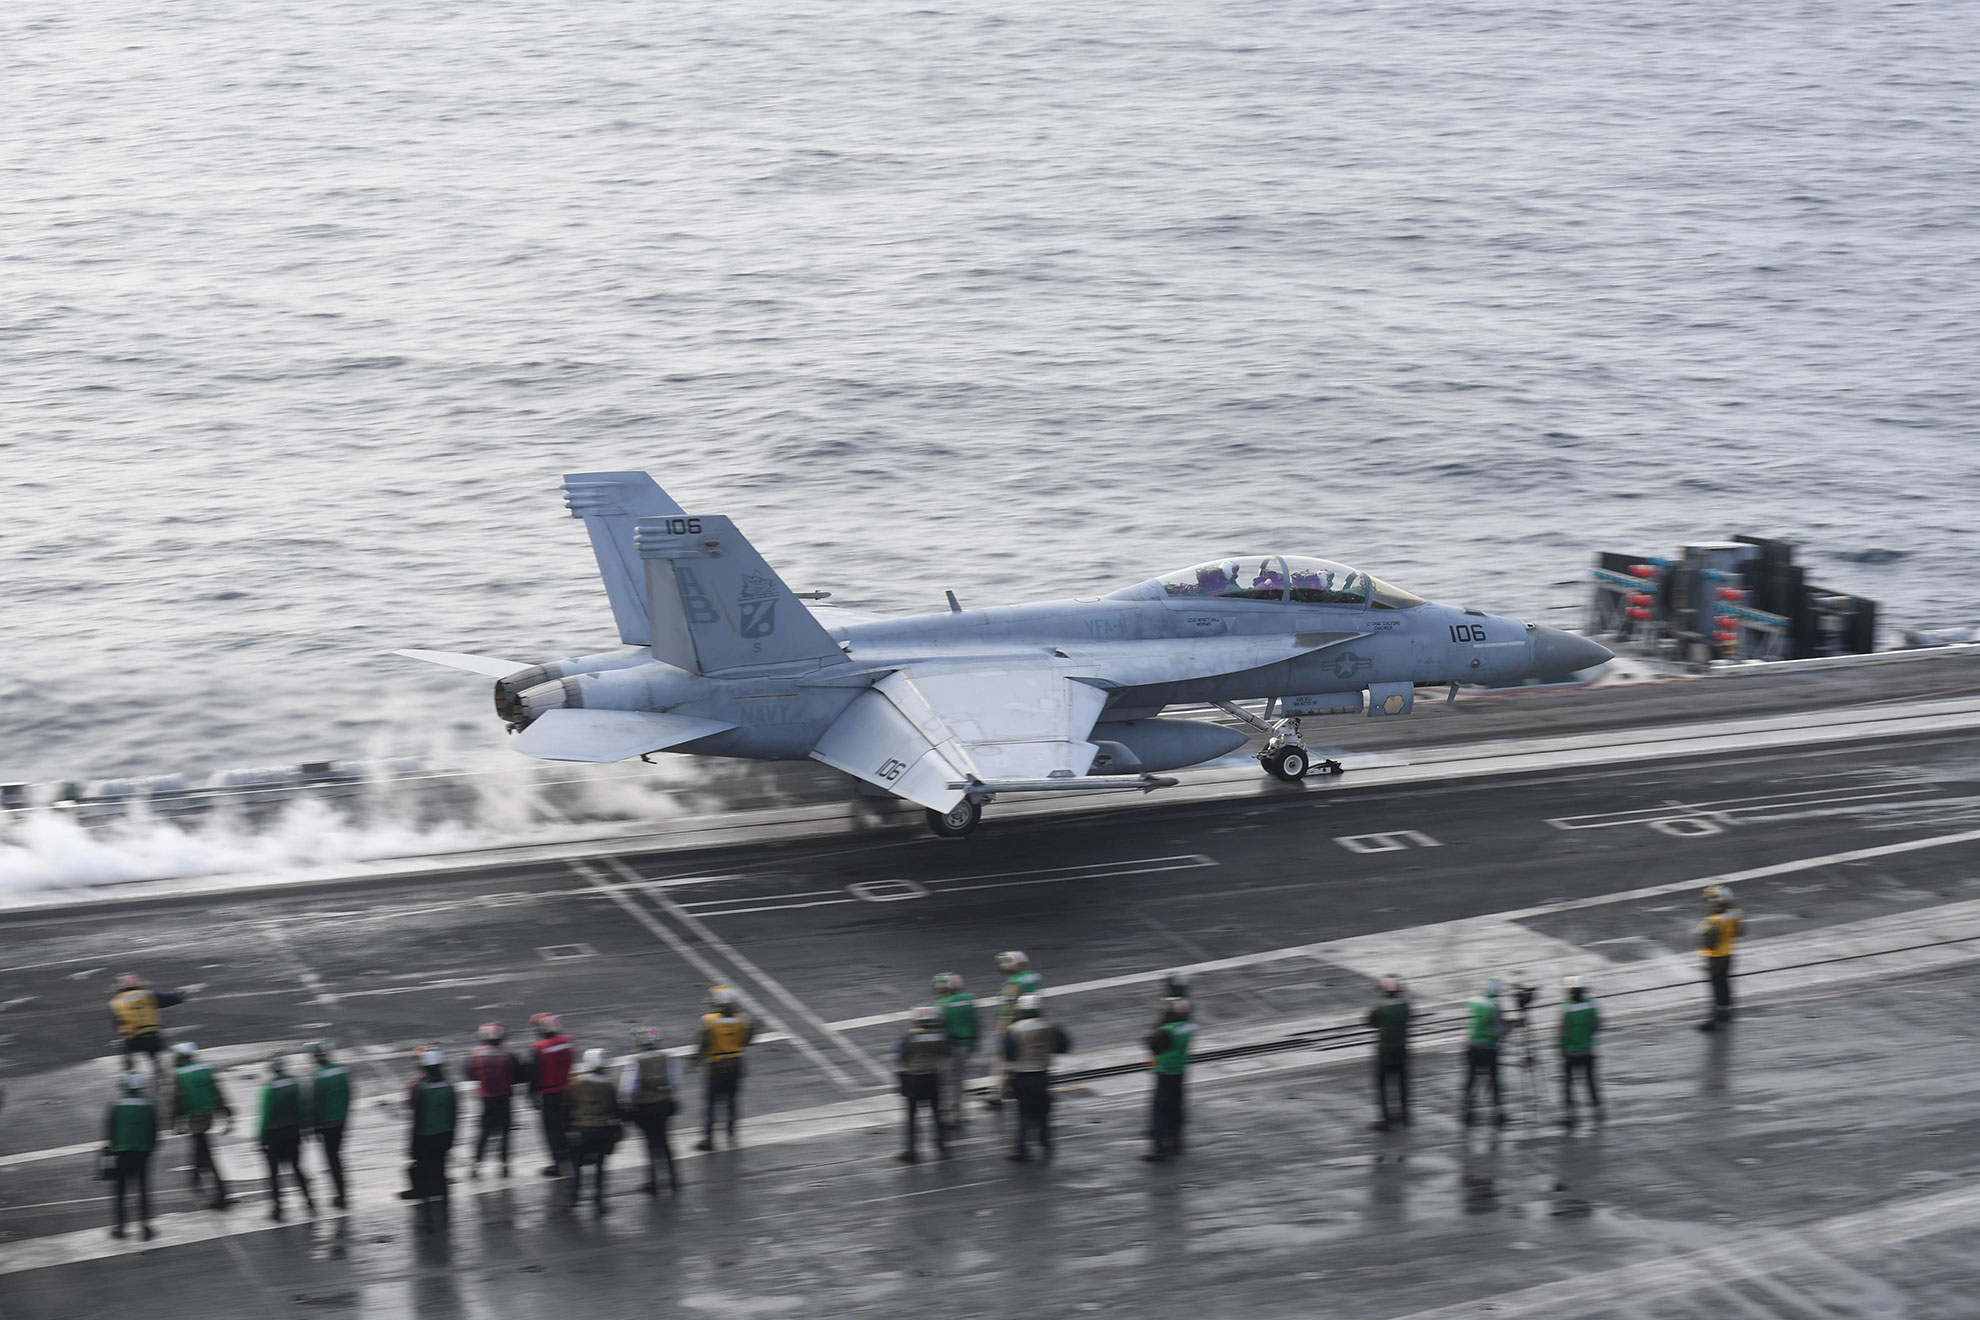 Atlantic Ocean (Sept. 18, 2018) An F/A-18F Super Hornet assigned to the "Red Rippers" of Strike Fighter Squadron (VFA) 11 takes off from the flight deck aboard the Nimitz-class aircraft carrier USS Harry S. Truman (CVN 75) in the North Atlantic, Sept. 18, 2018. The Harry S. Truman Carrier Strike Group is deployed to the U.S. 6th Fleet area of operations, demonstrating commitment to regional allies and partners, combat power, and the flexibility of U.S. naval forces to operate wherever and whenever the nation requires -- U.S. Navy photo by MCS Seaman Joseph A.D. Phillips. -